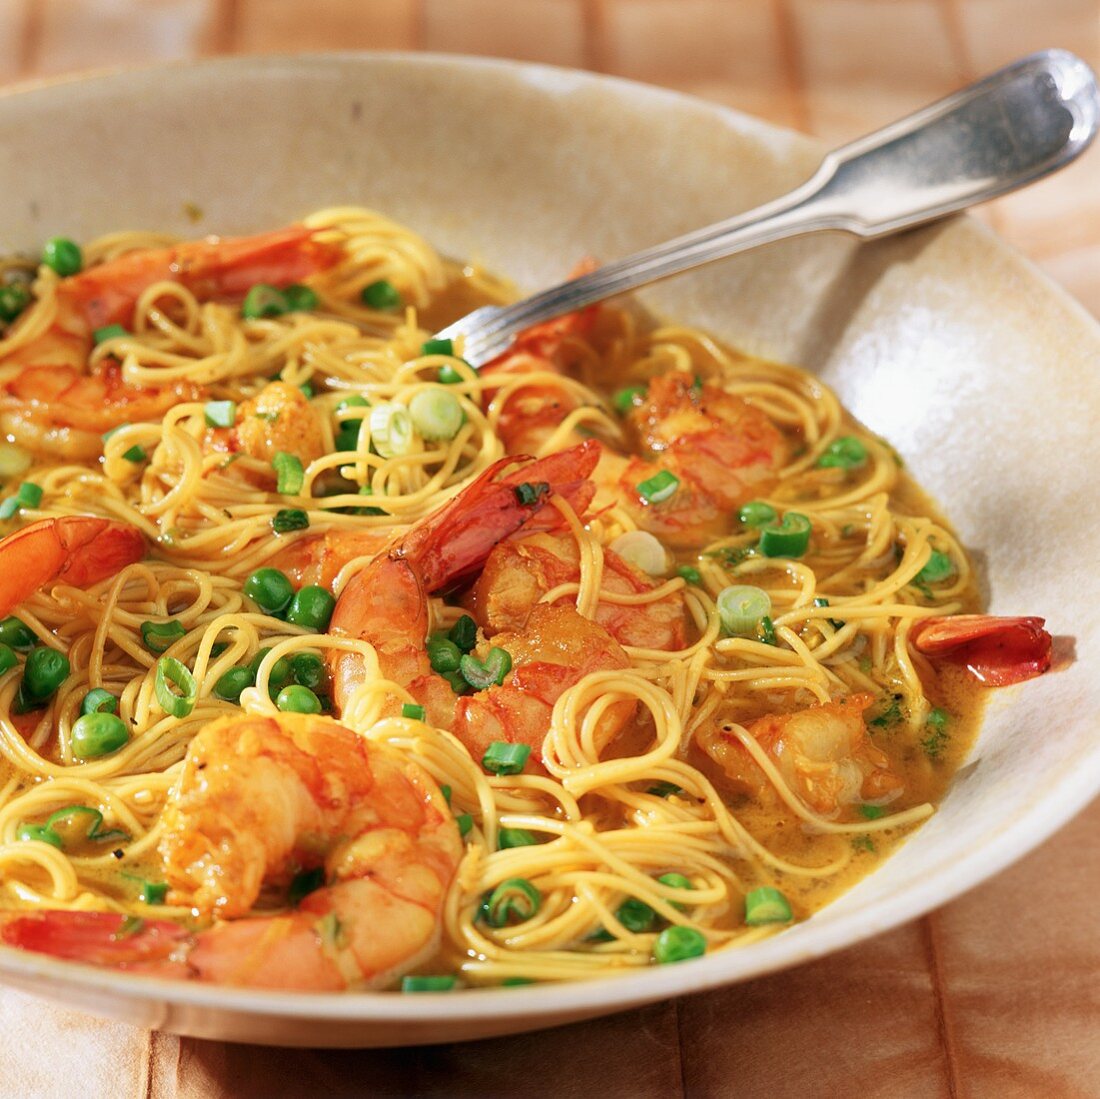 Pan Seared Shrimp with Peas and Noodles